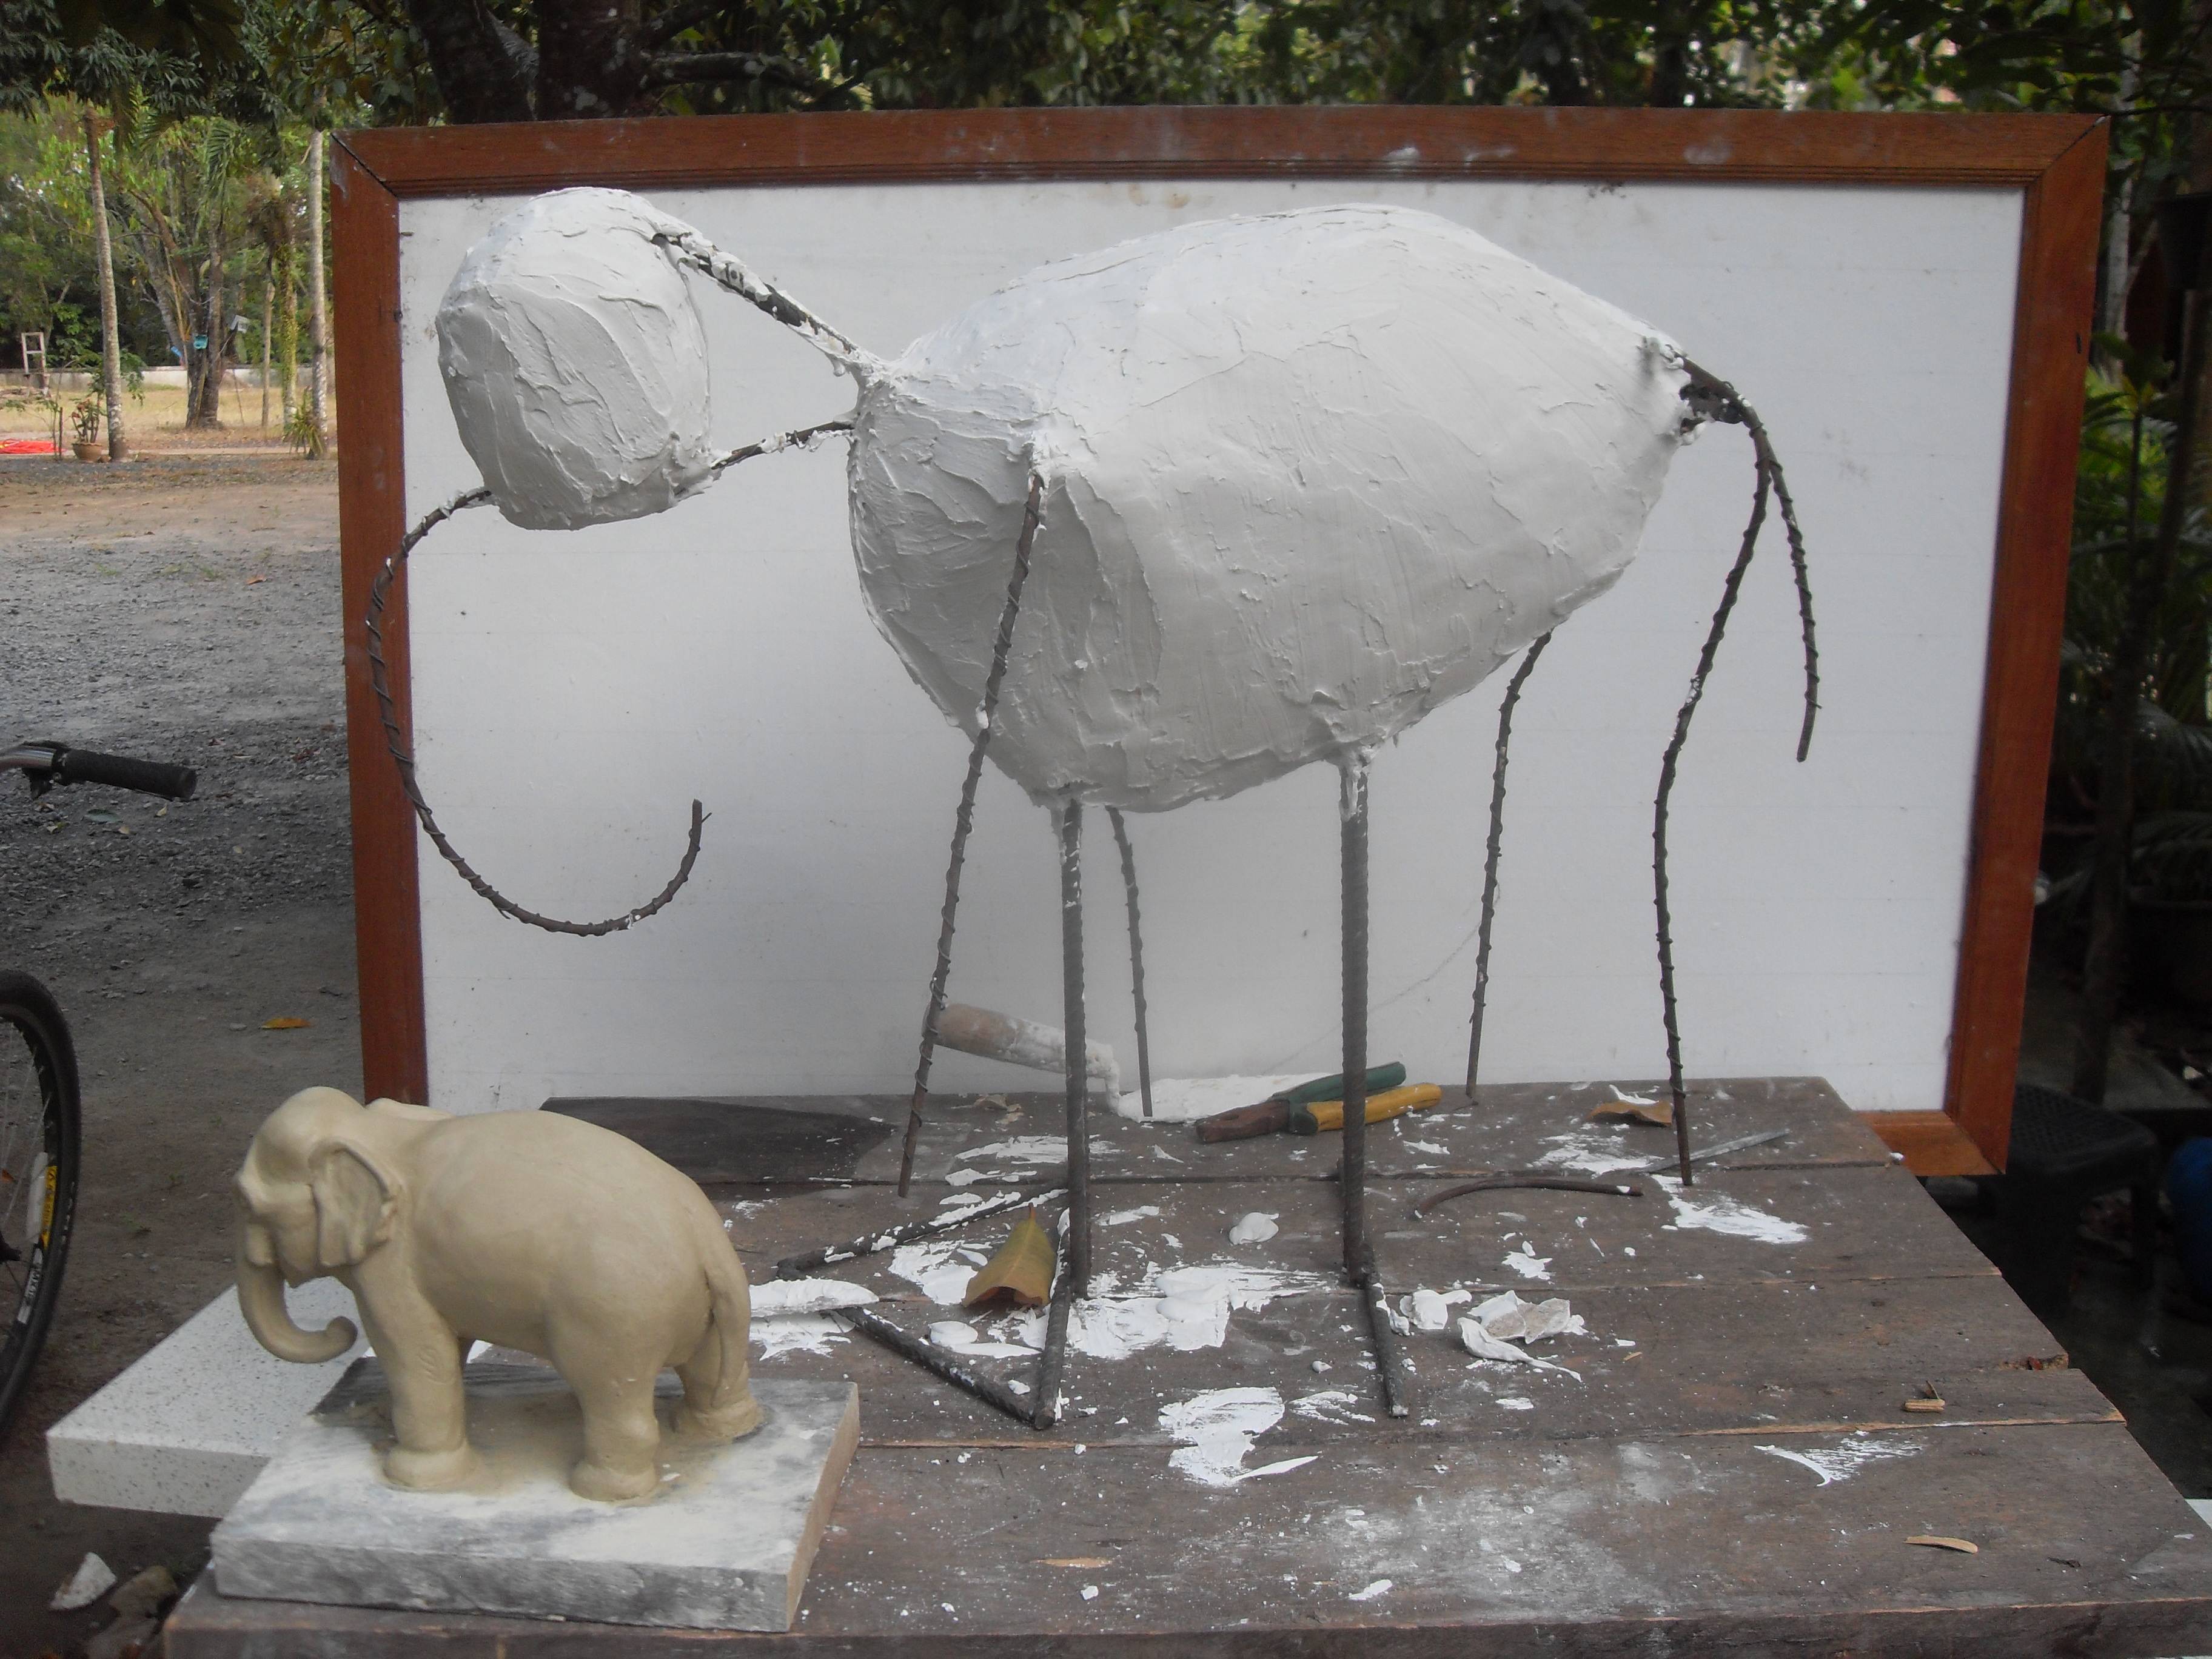 Next, I applied drywall plaster to the armature. Now all I have to do ...